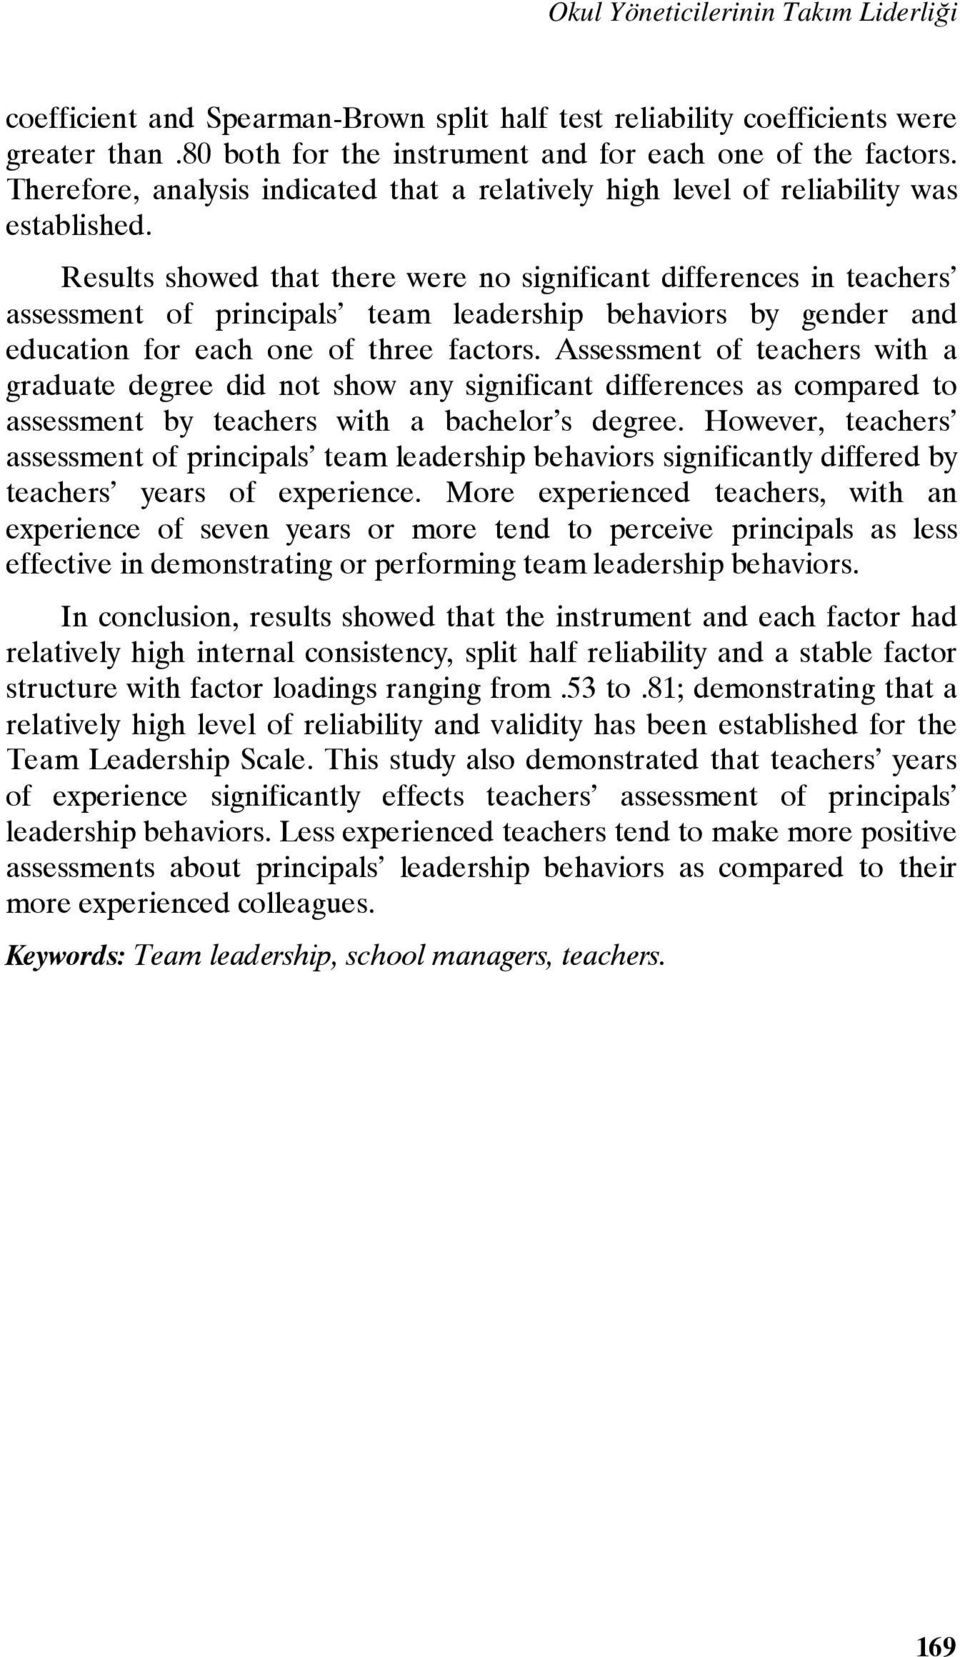 Results showed that there were no significant differences in teachers assessment of principals team leadership behaviors by gender and education for each one of three factors.